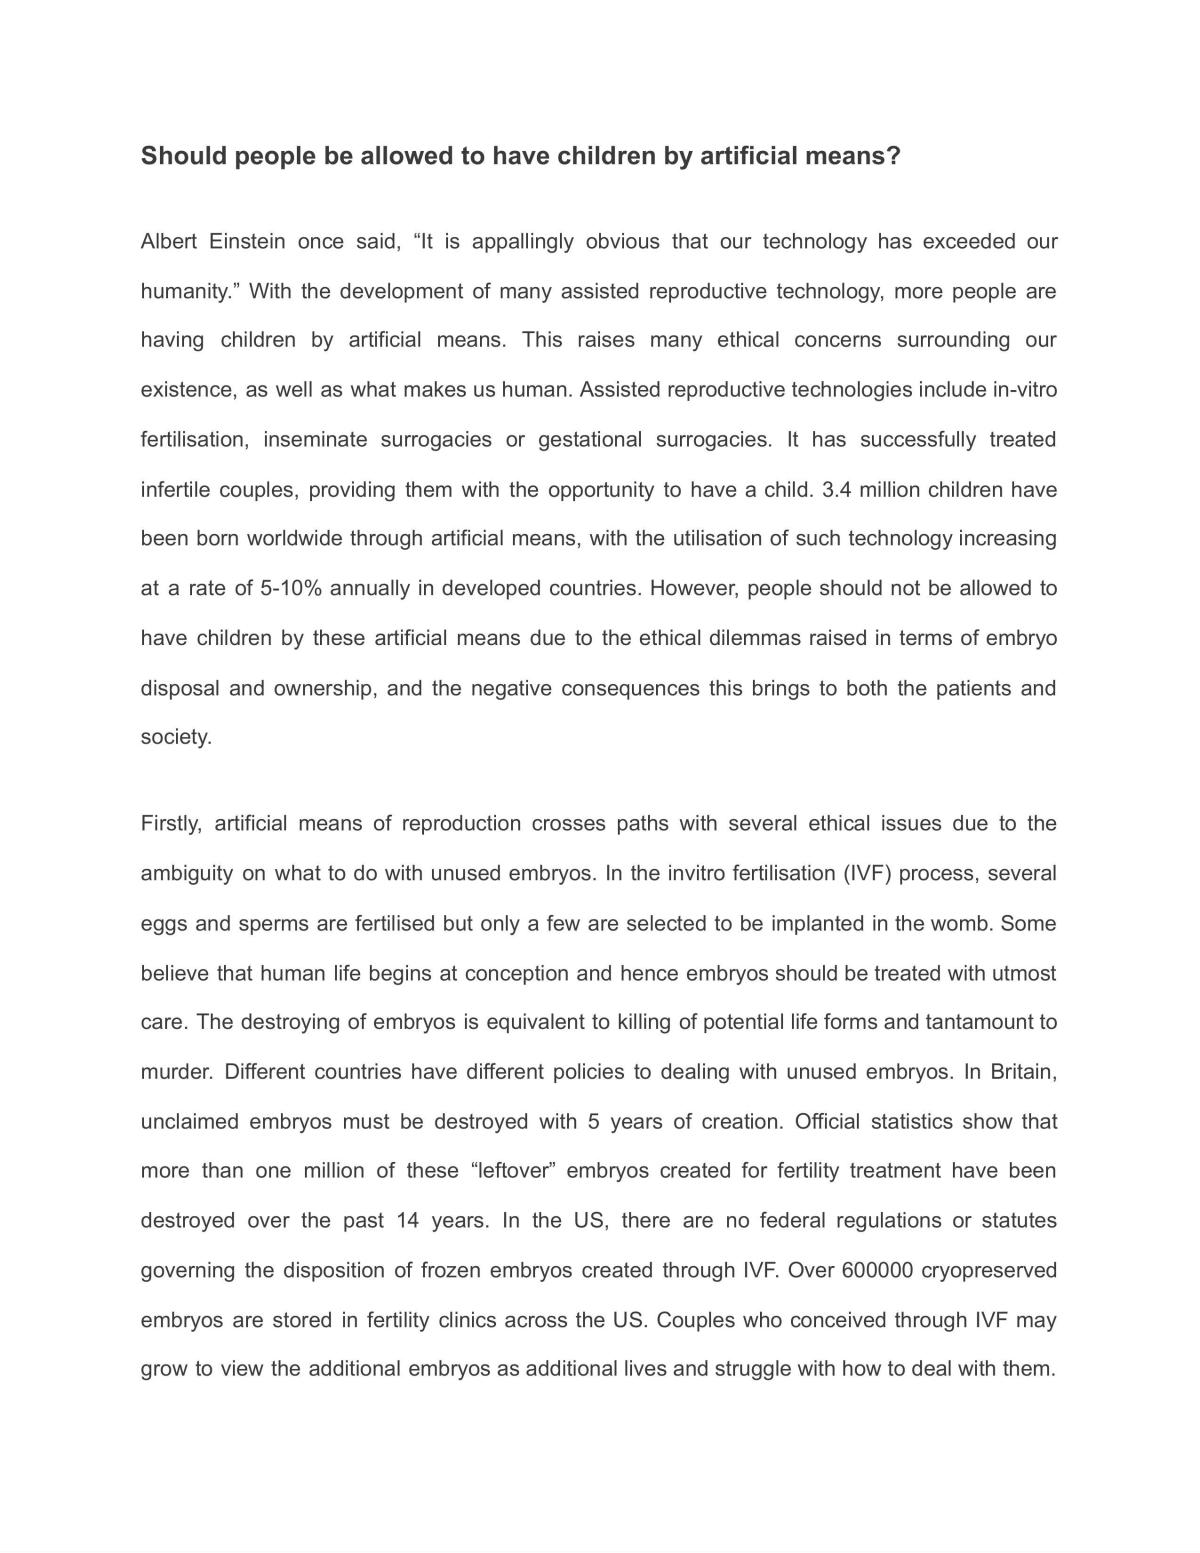 GP essay - Technology and Humanity - Page 1